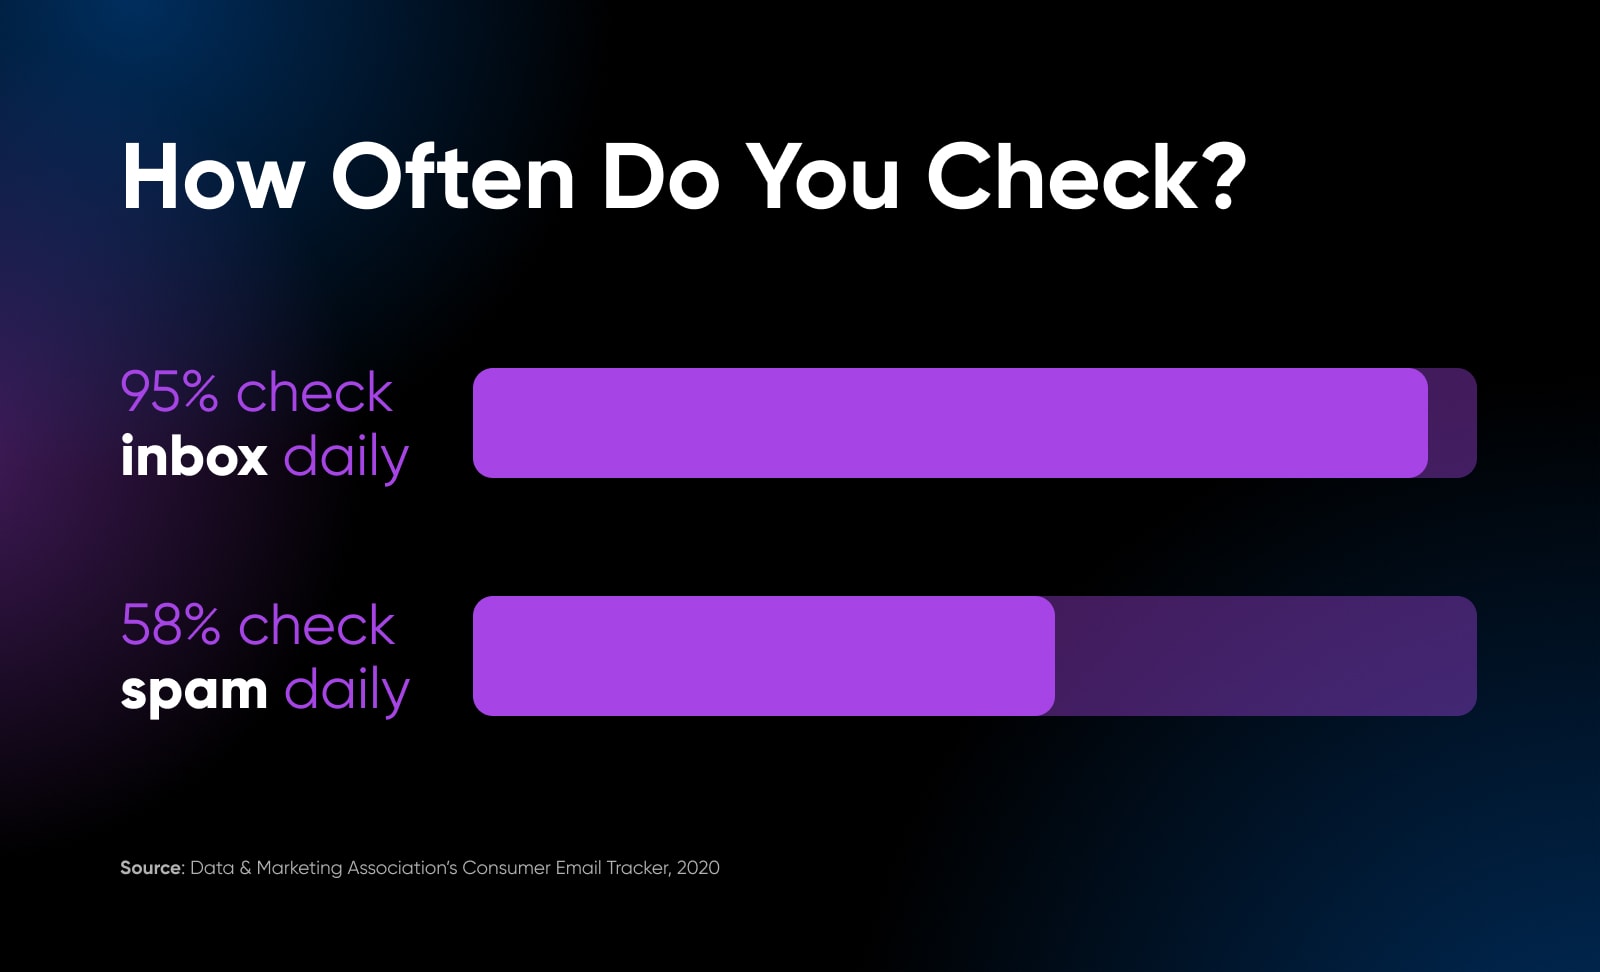 this graph shows how often people check email inbox. based on Data & Marketing Association's Consumer Email Tracker on 2020, 95% check inbox daily, and 58% check spam daily.